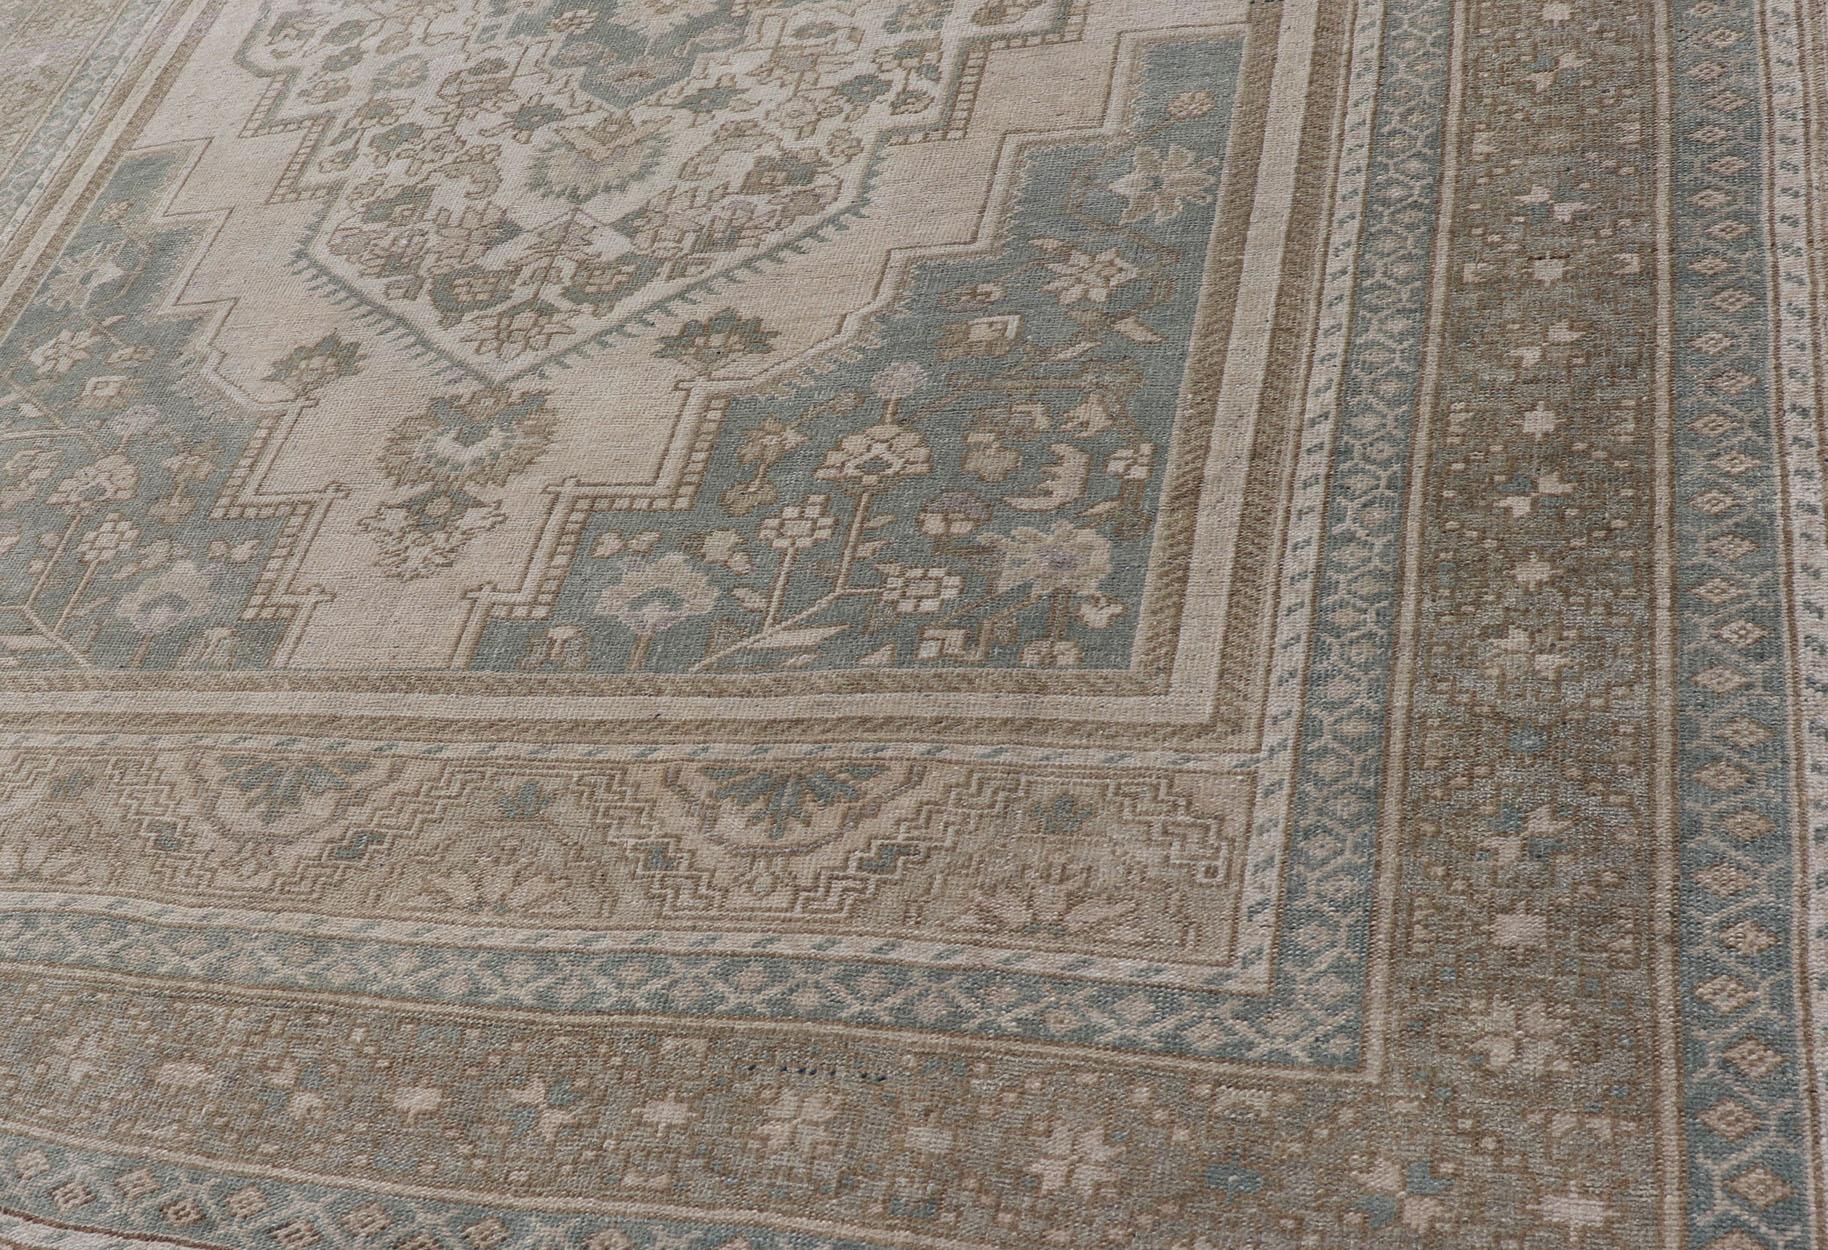 Turkish Oushak Vintage Medallion Rug in Light Blue-Green, Tan, Taupe, and Cream For Sale 1